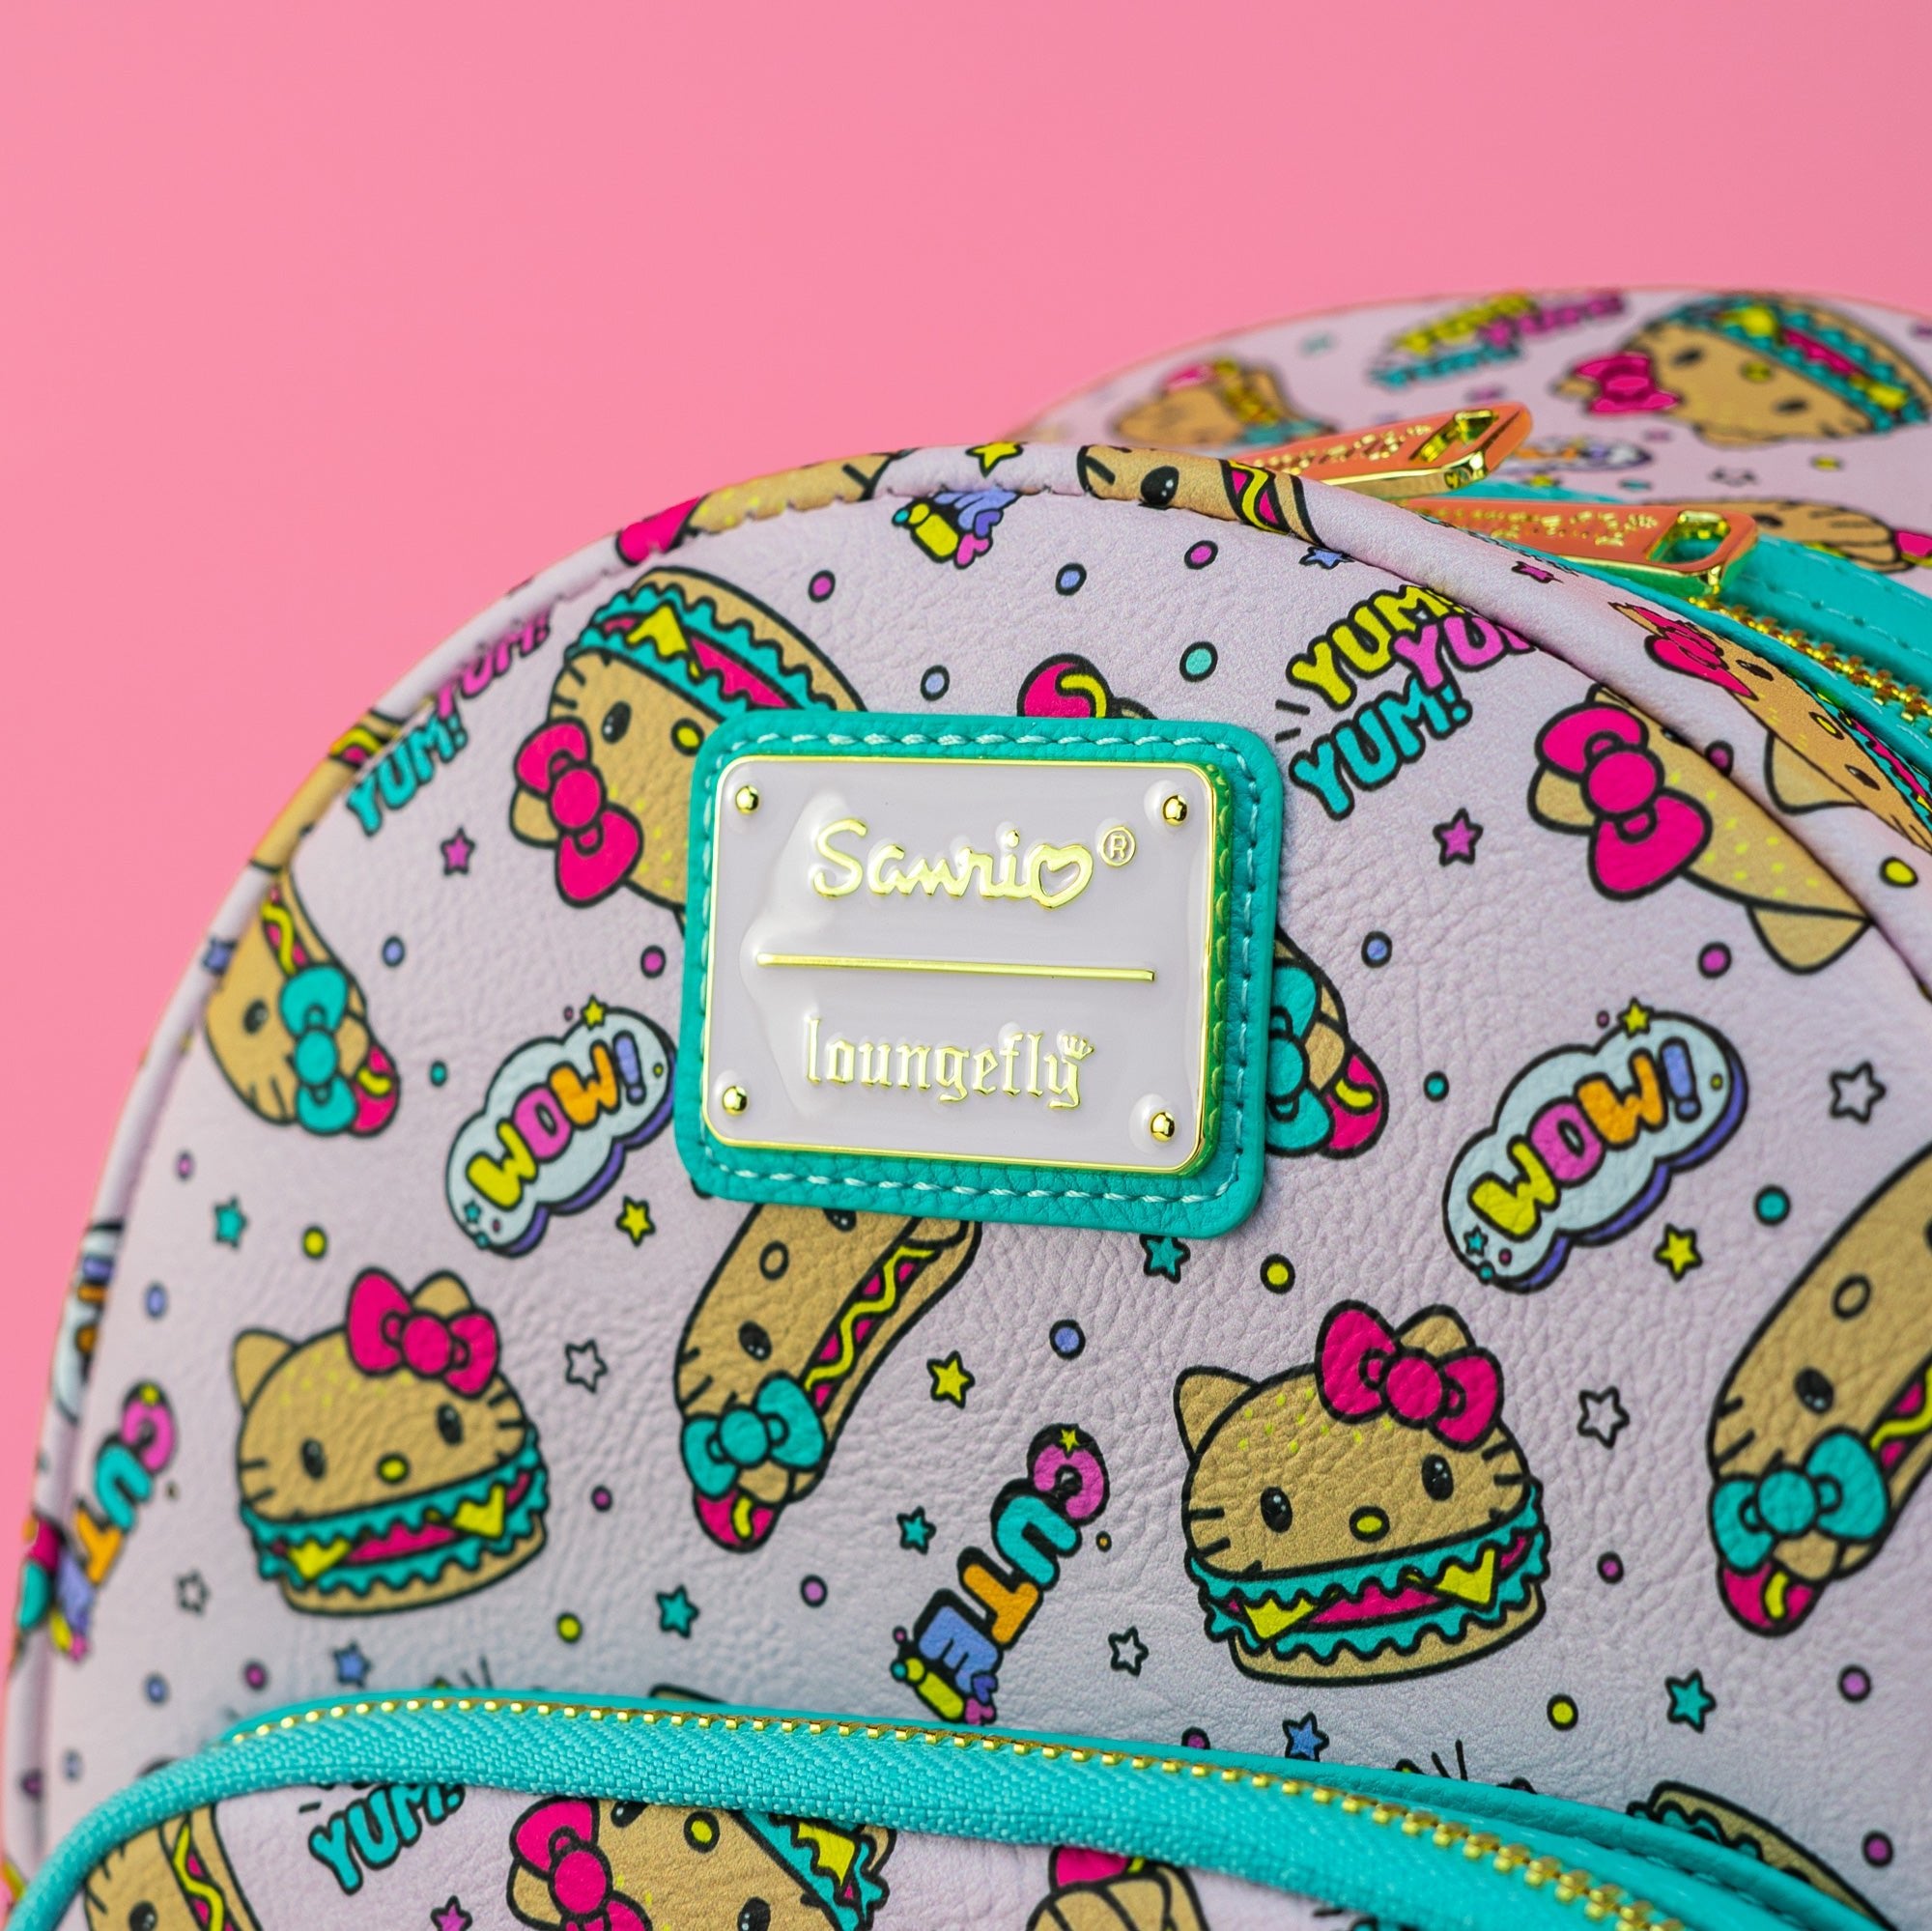 Loungefly x Sanrio Hello Kitty Burger and Hot Dog Print Mini Backpack - GeekCore